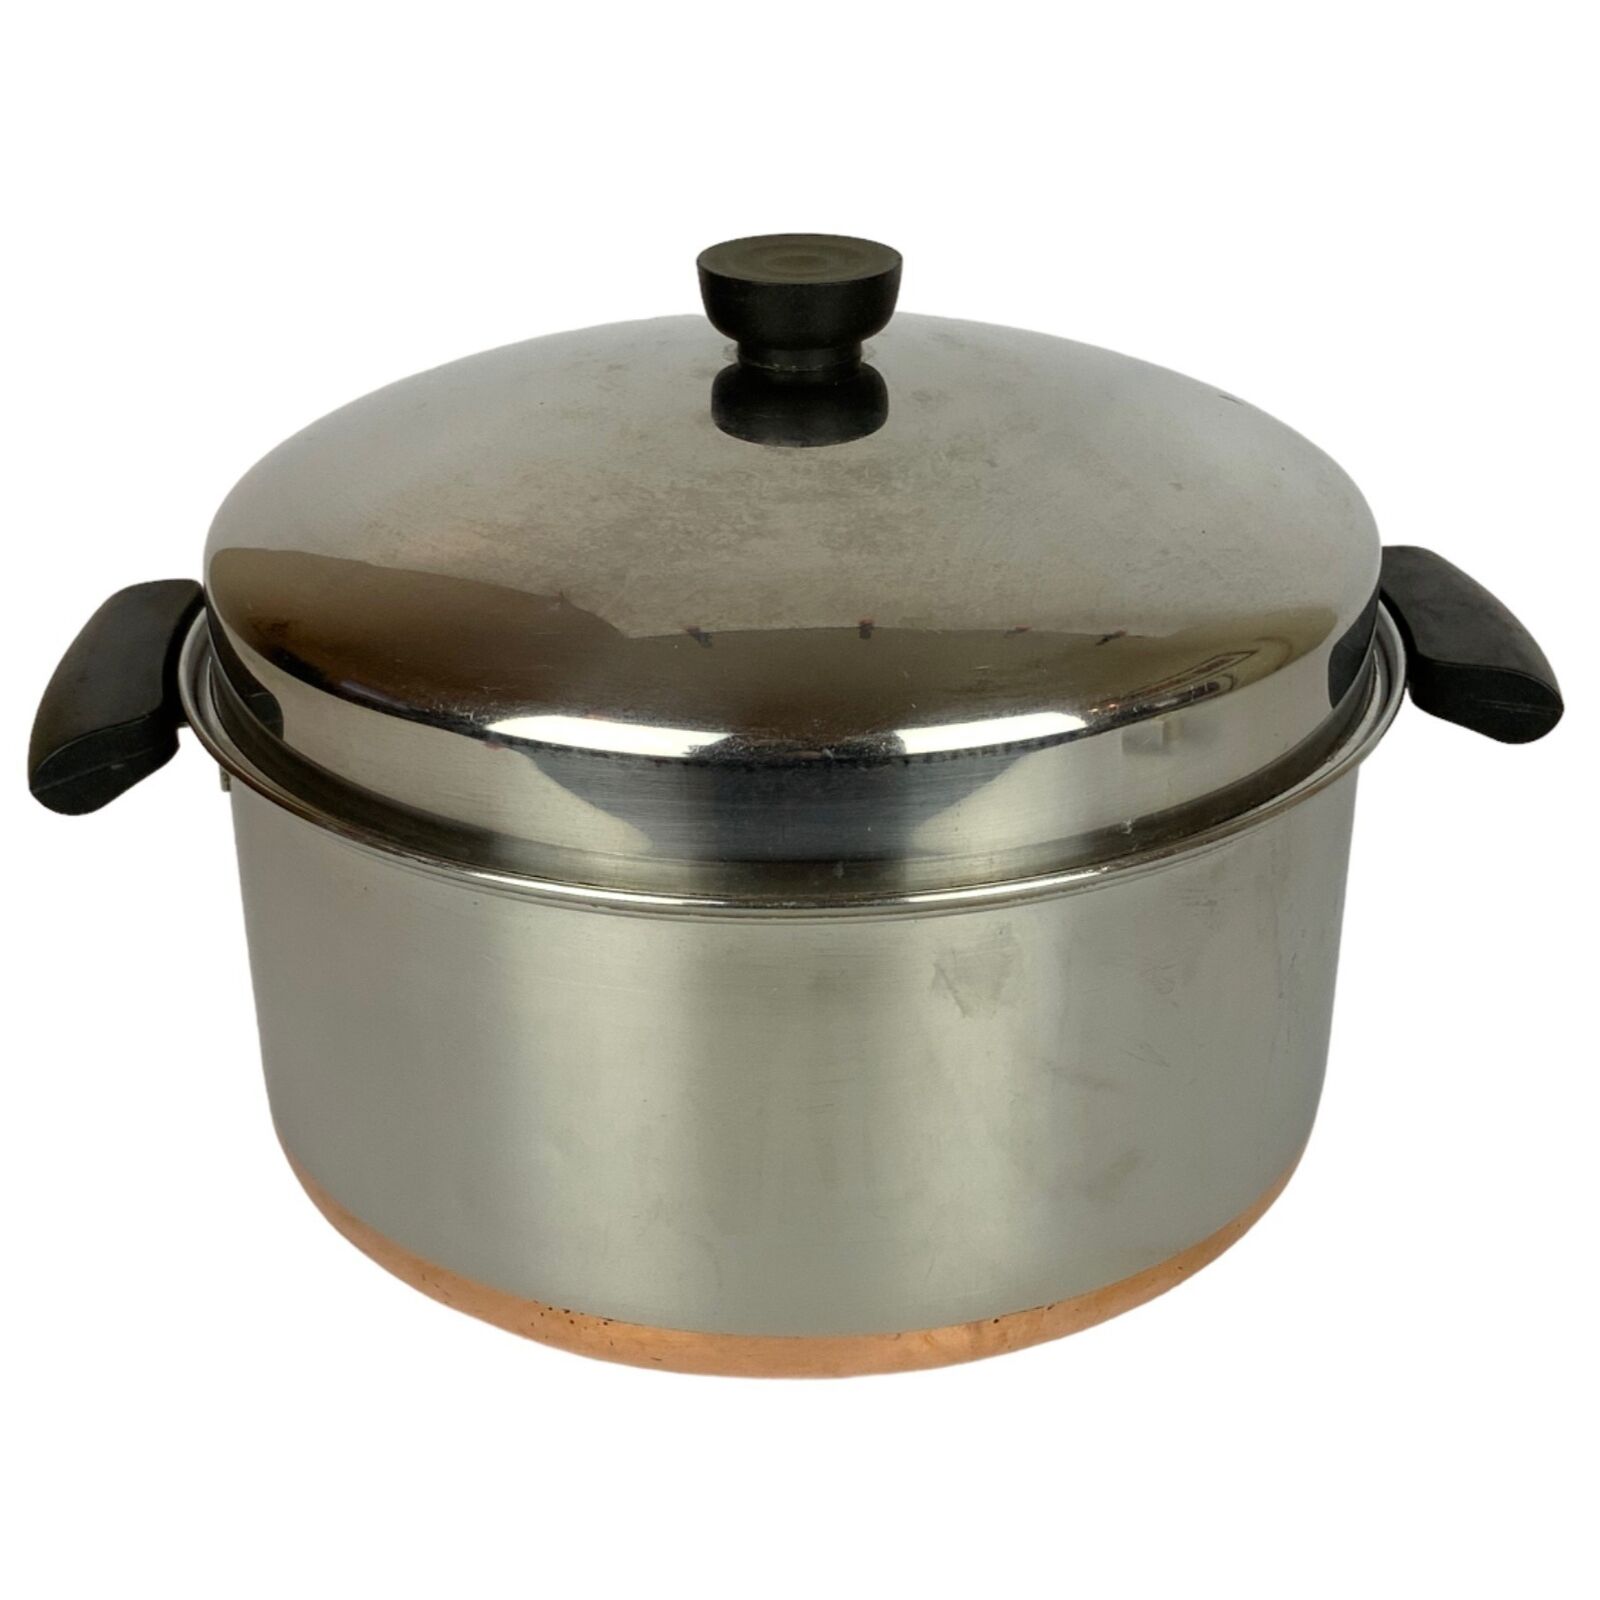 Revere Ware 6 Qt Stock Pot Dome Lid Copper Clad Stainless Steel Double Ring Pre 